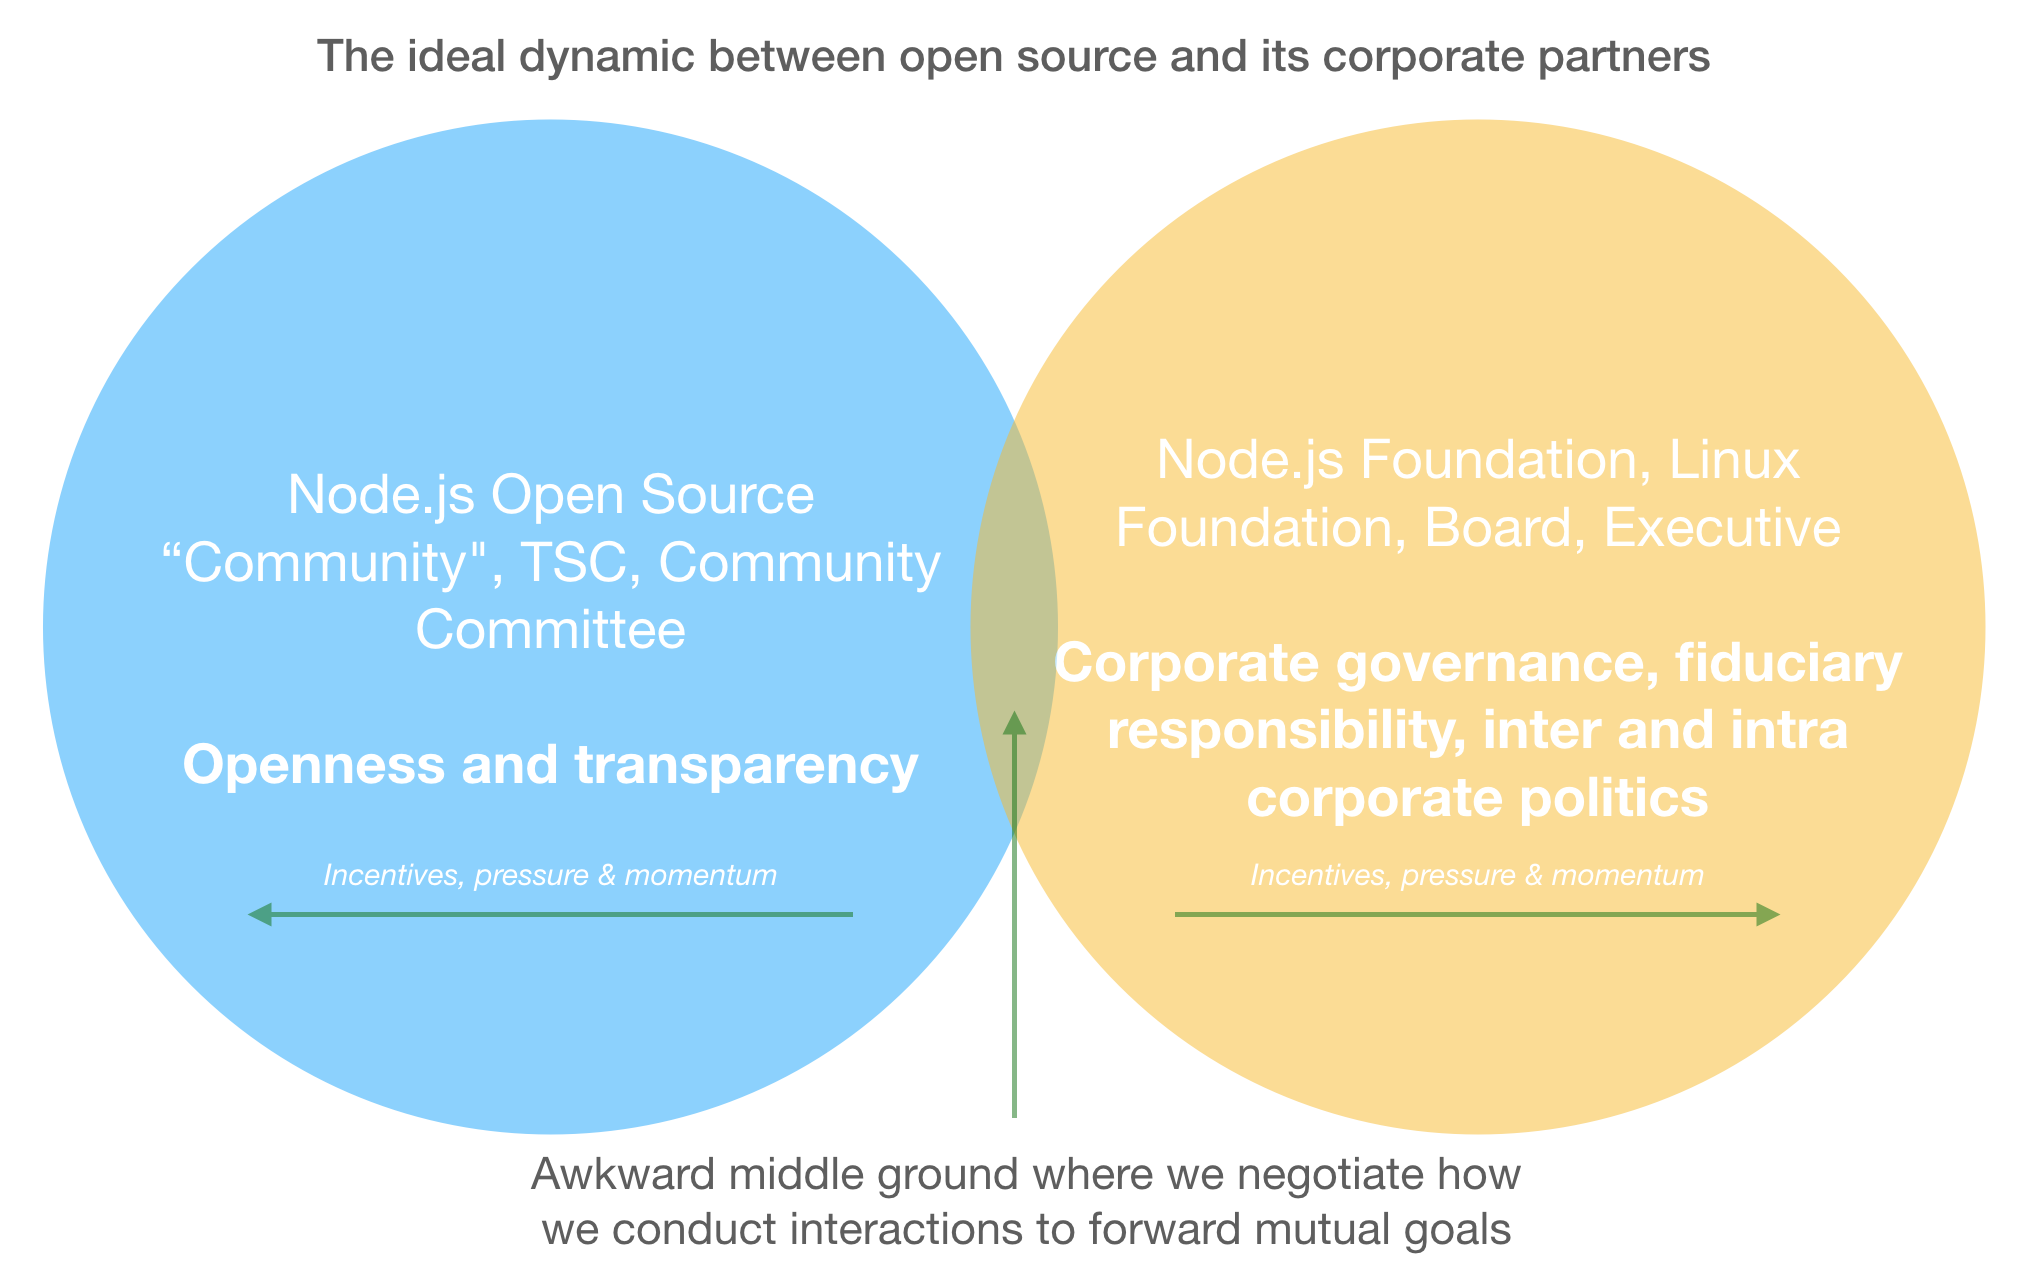 The ideal dynamic between open source and its corporate partners